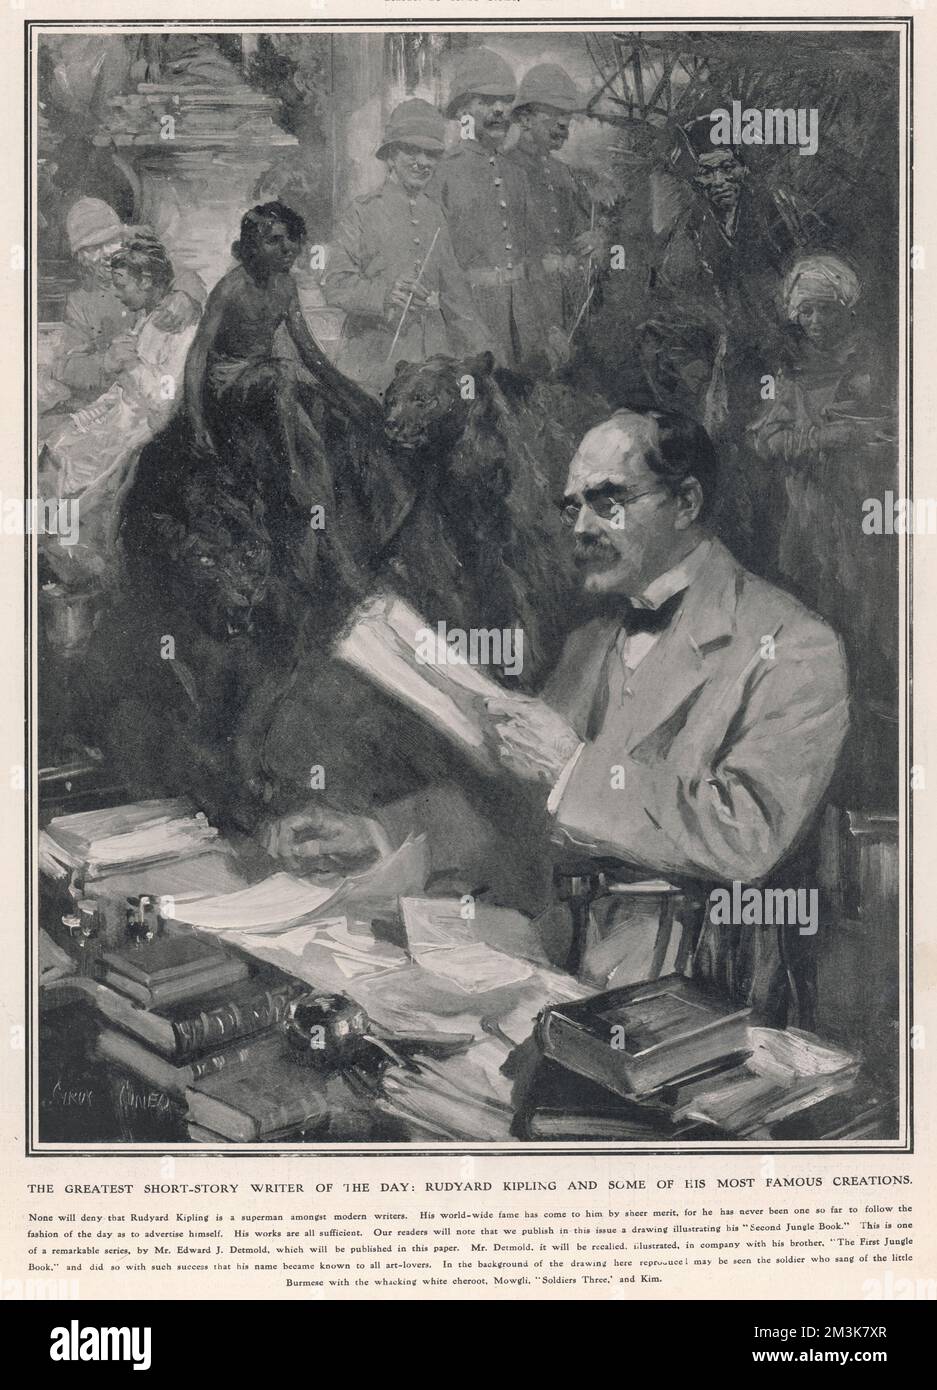 Unconventional Portraits: No.XV.-A Superman amongst writers by Cyrus Cuneo. An impression of Rudyard Kipling, novelist and poet, showing him at work surrounded by characters from his books. Stock Photo